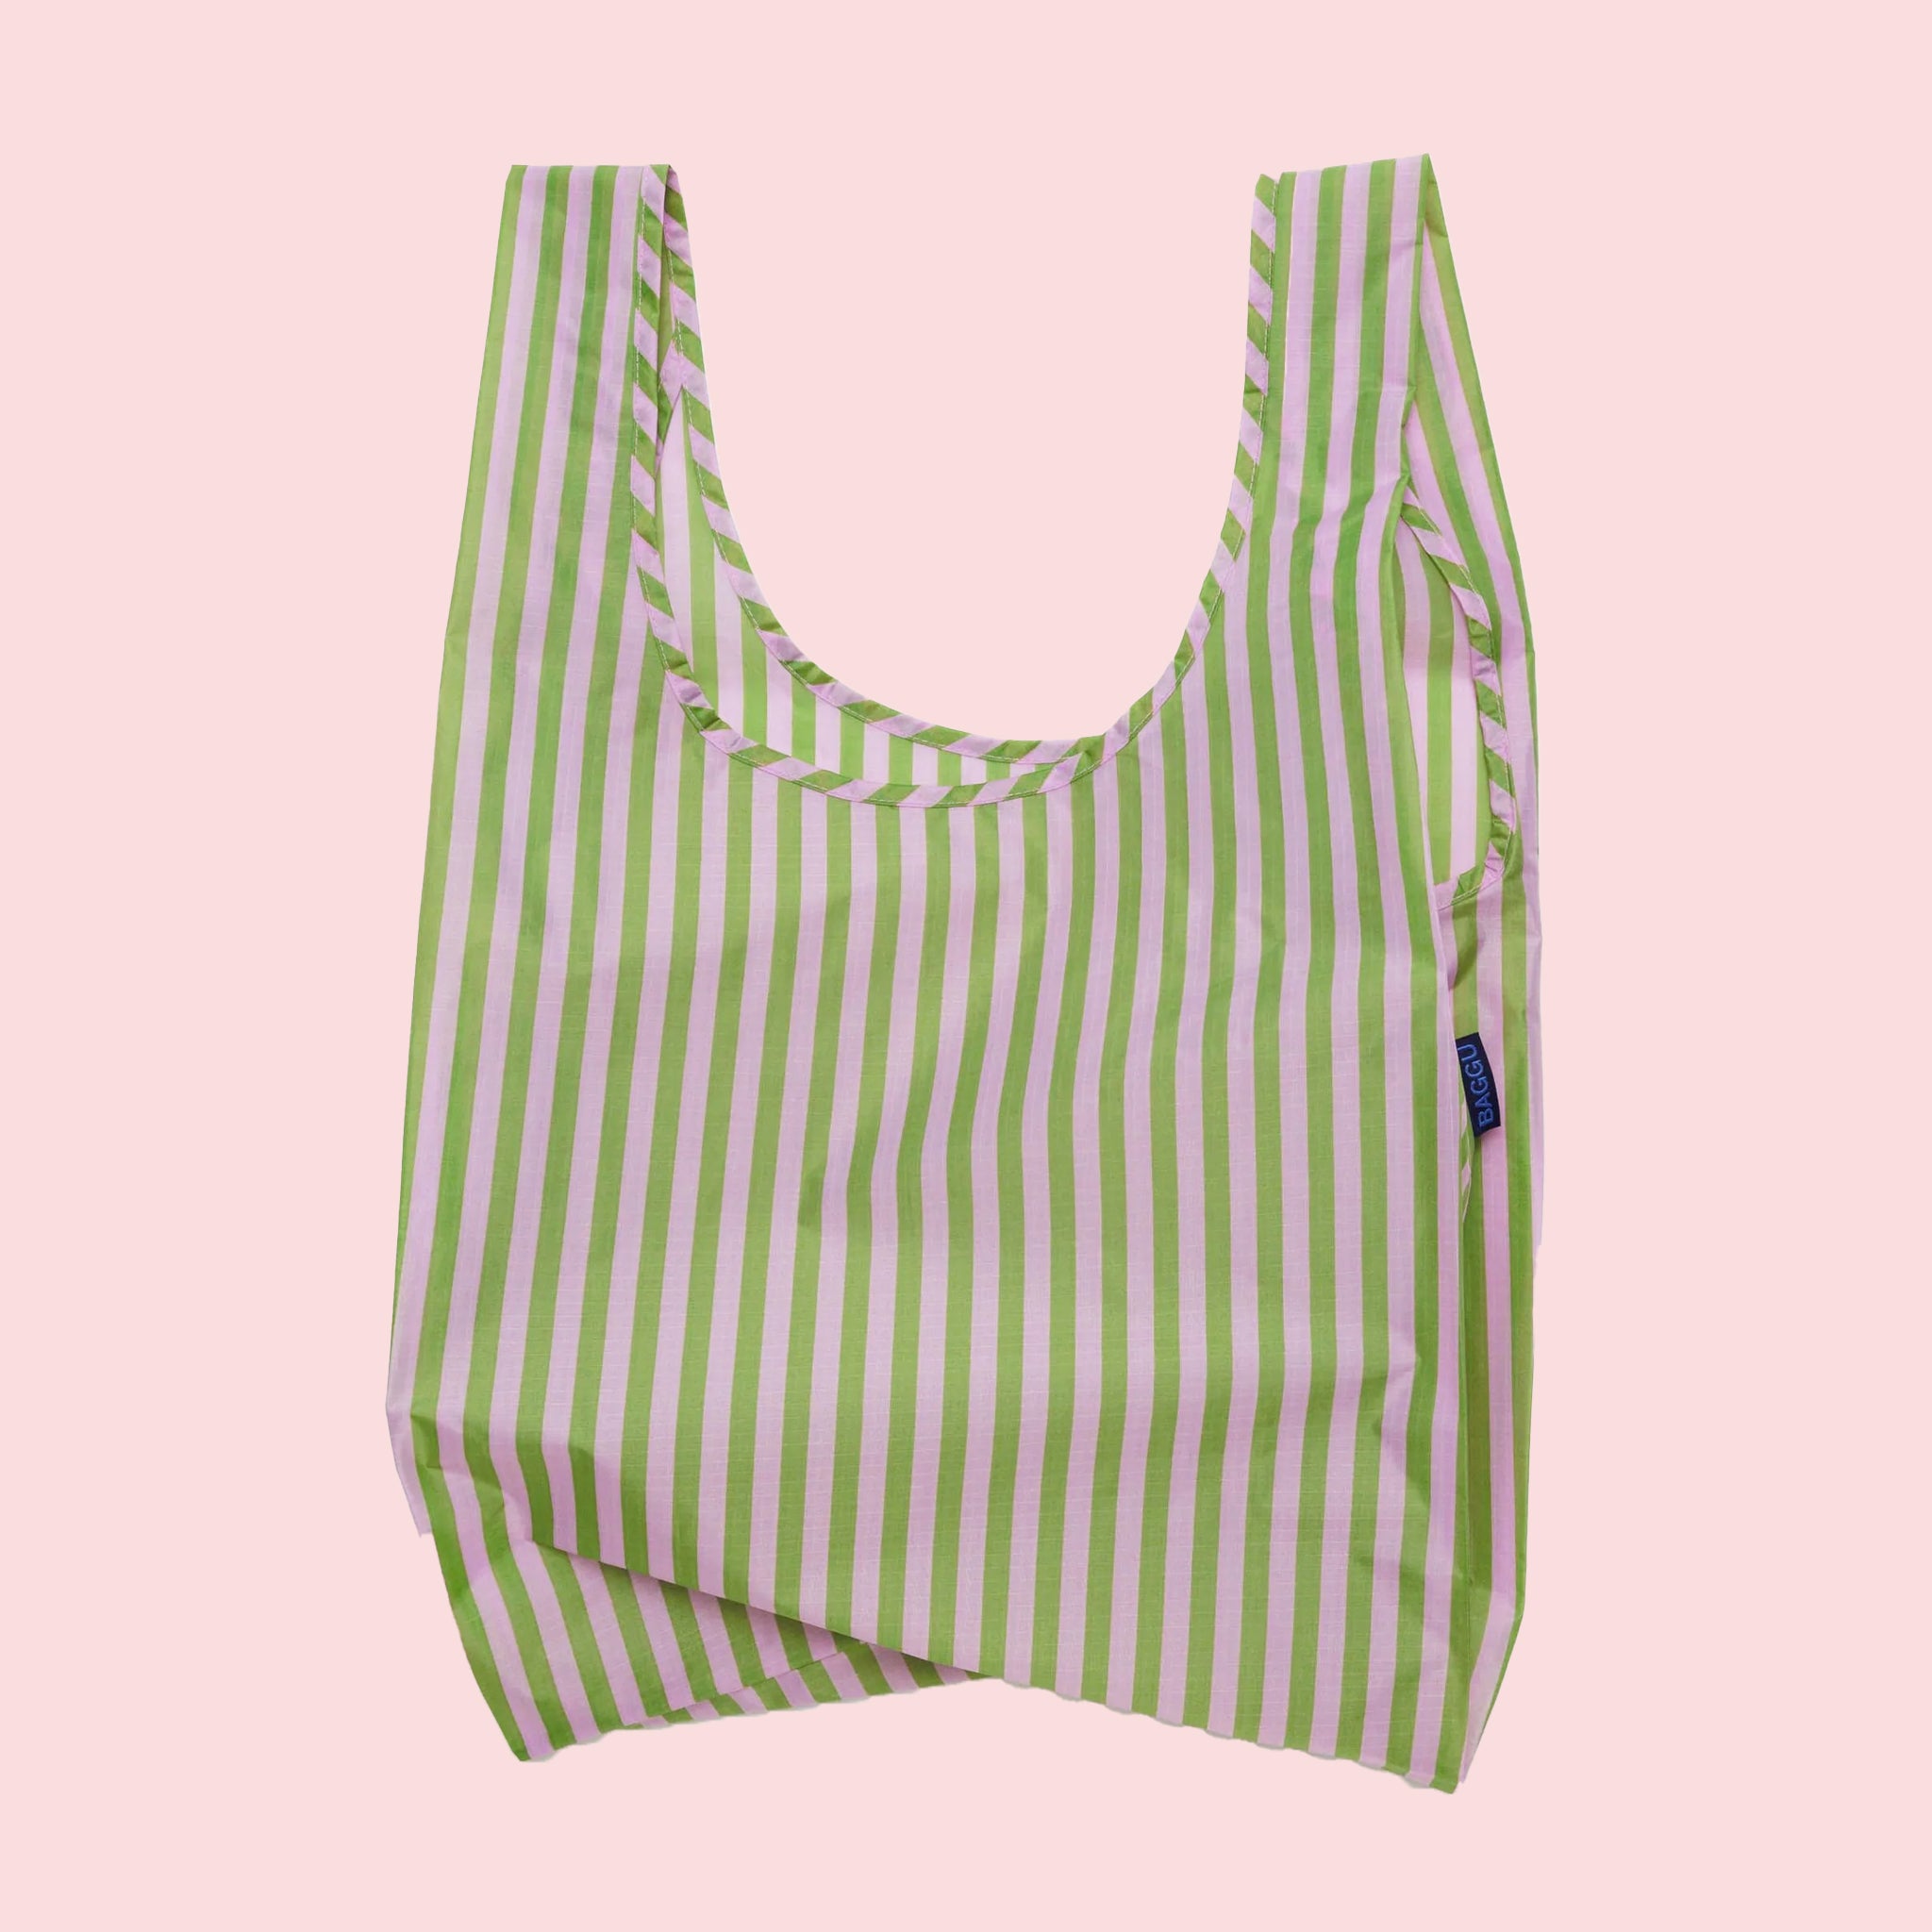 A light pink and green striped nylon reusable tote bag. 